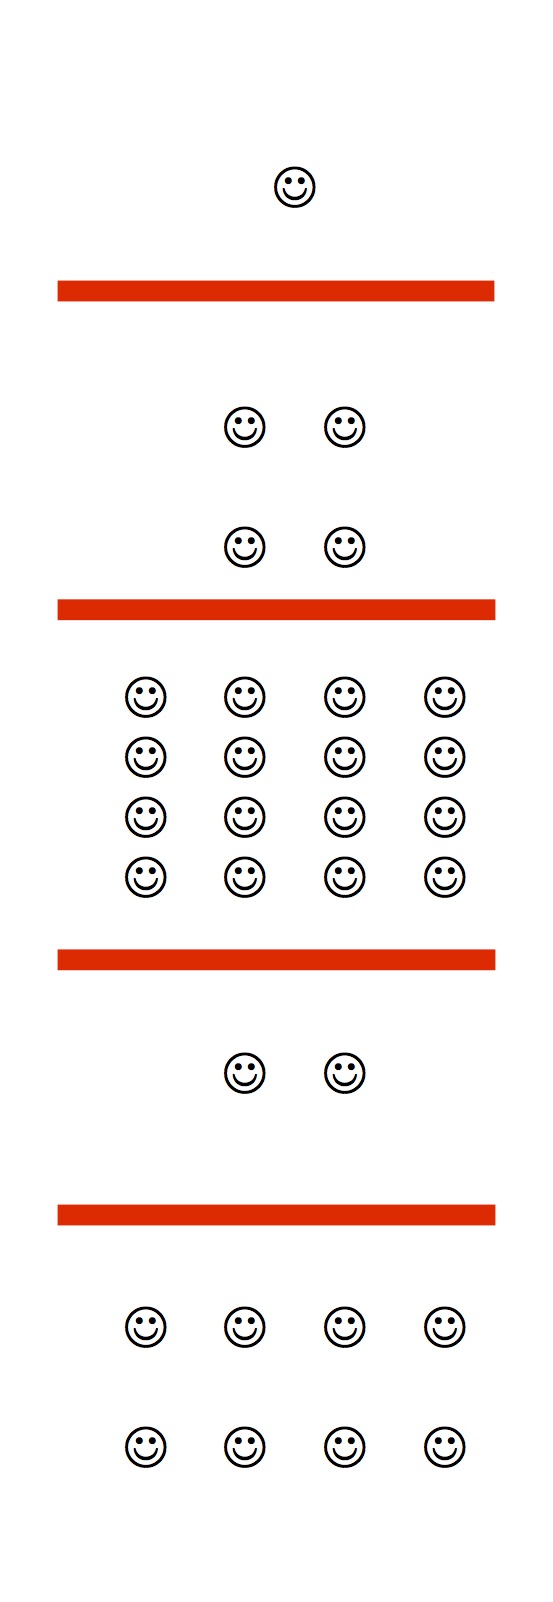 One smiley face sits in the center of a white background, above a red line. Below are two rows of two smiley faces, above another red line. Below that are 16 smiley faces in four rows of four, and below that, a red line, two smiley faces, another red line, followed by eight smiley faces in two rows of four.